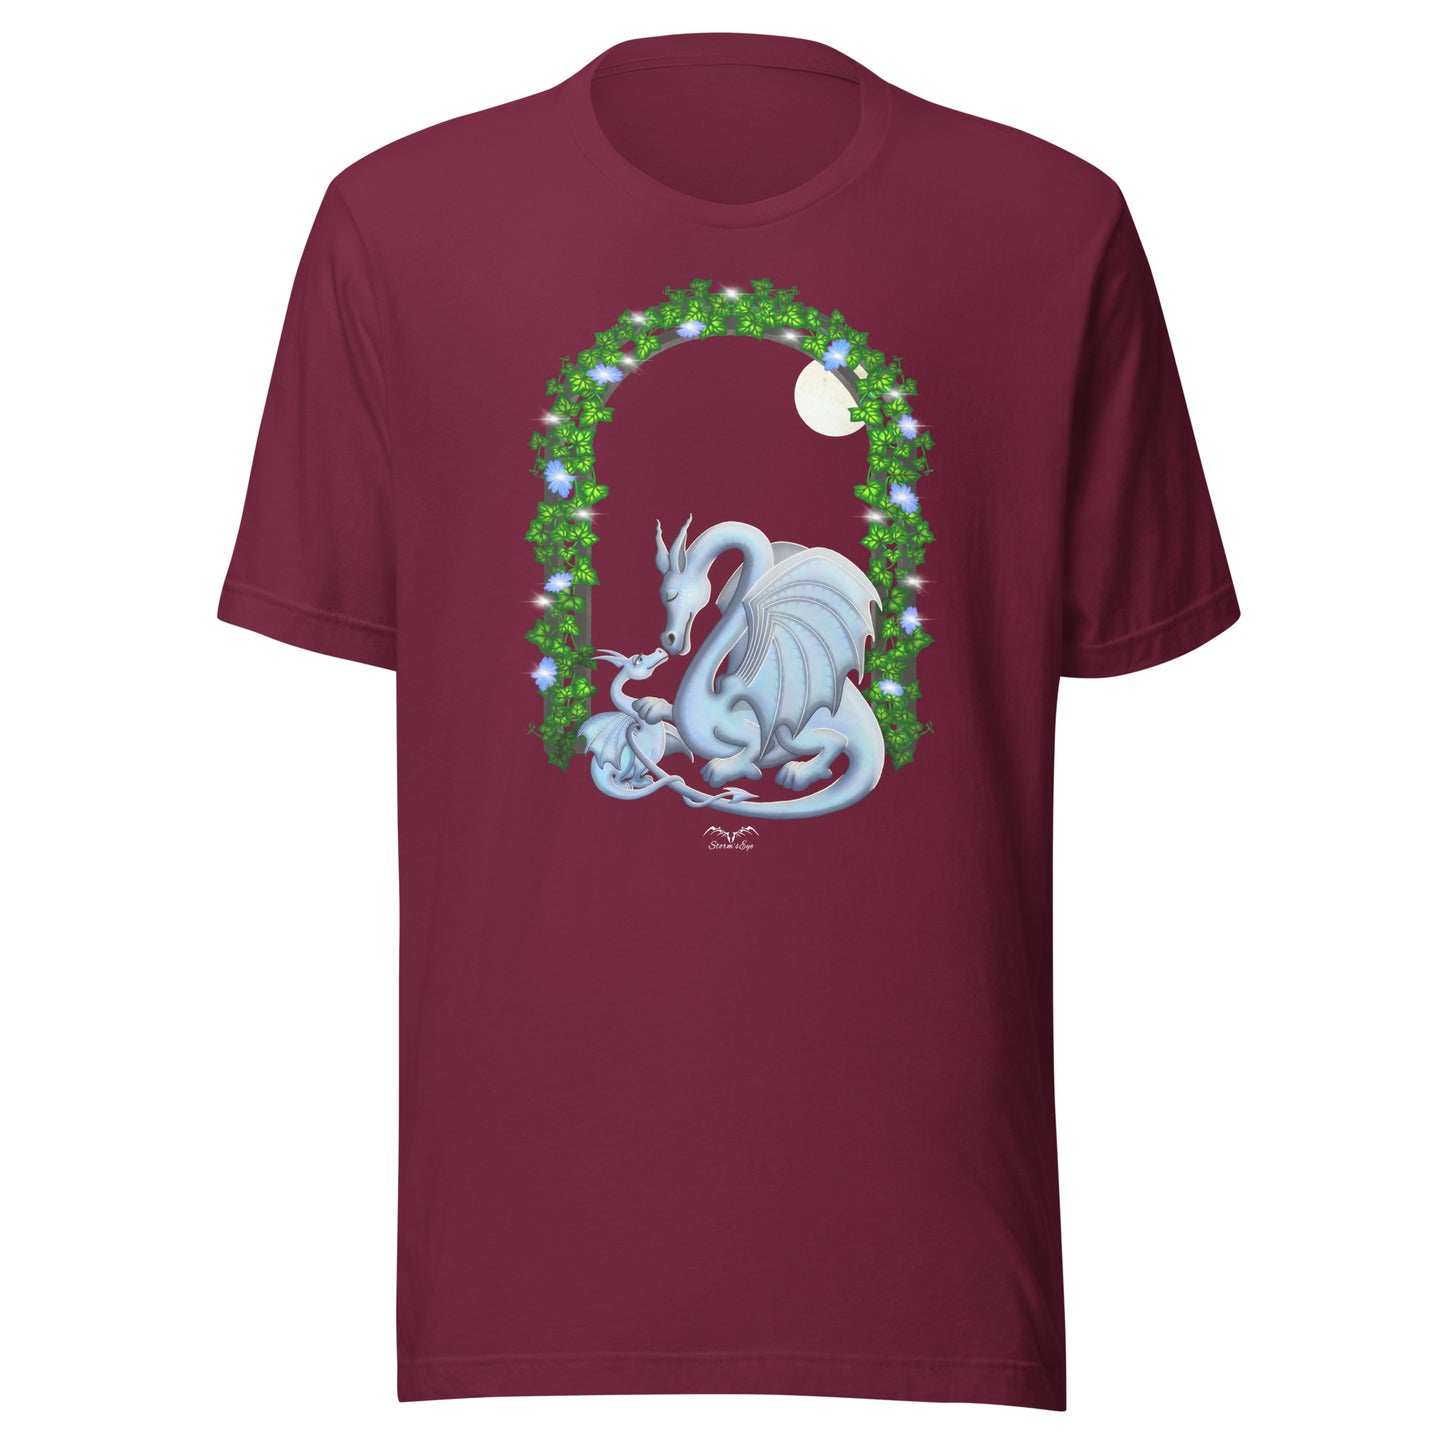 Mum and baby dragon T-shirt, wine red, by Stormseye Design